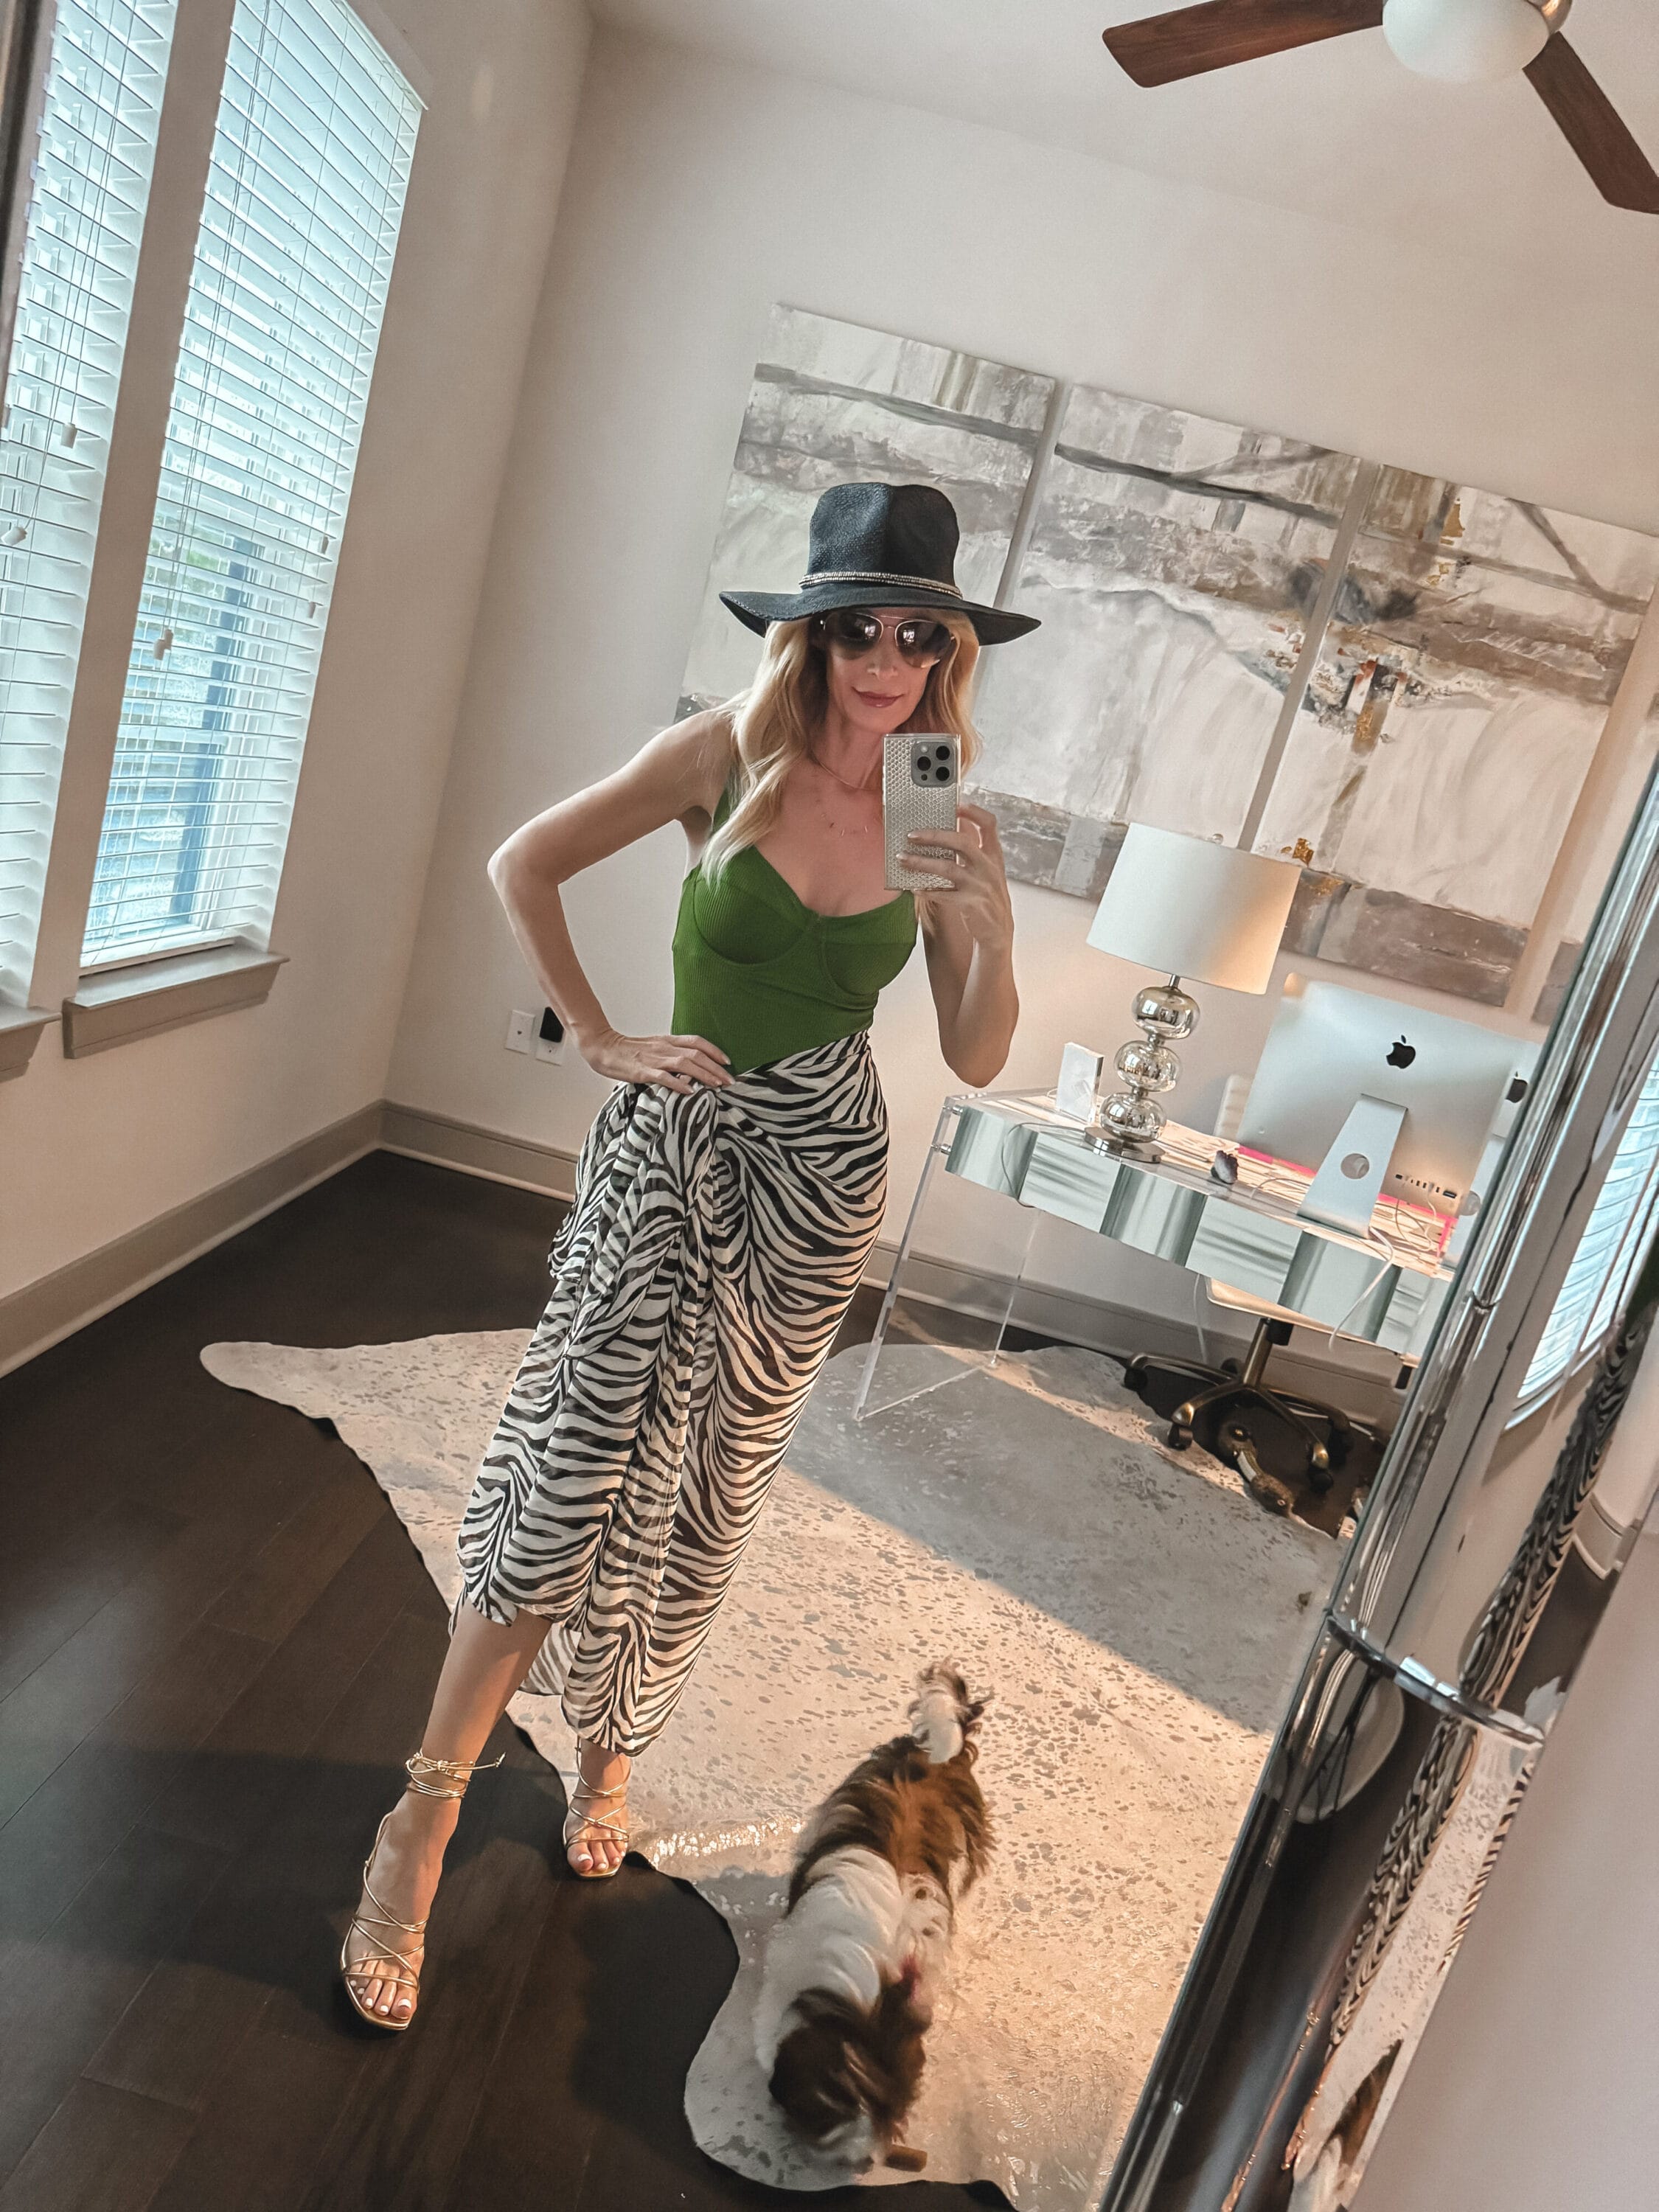 Dallas fashion influencer for women over 40 wearing a one piece bathing suit and a zebra sarong.